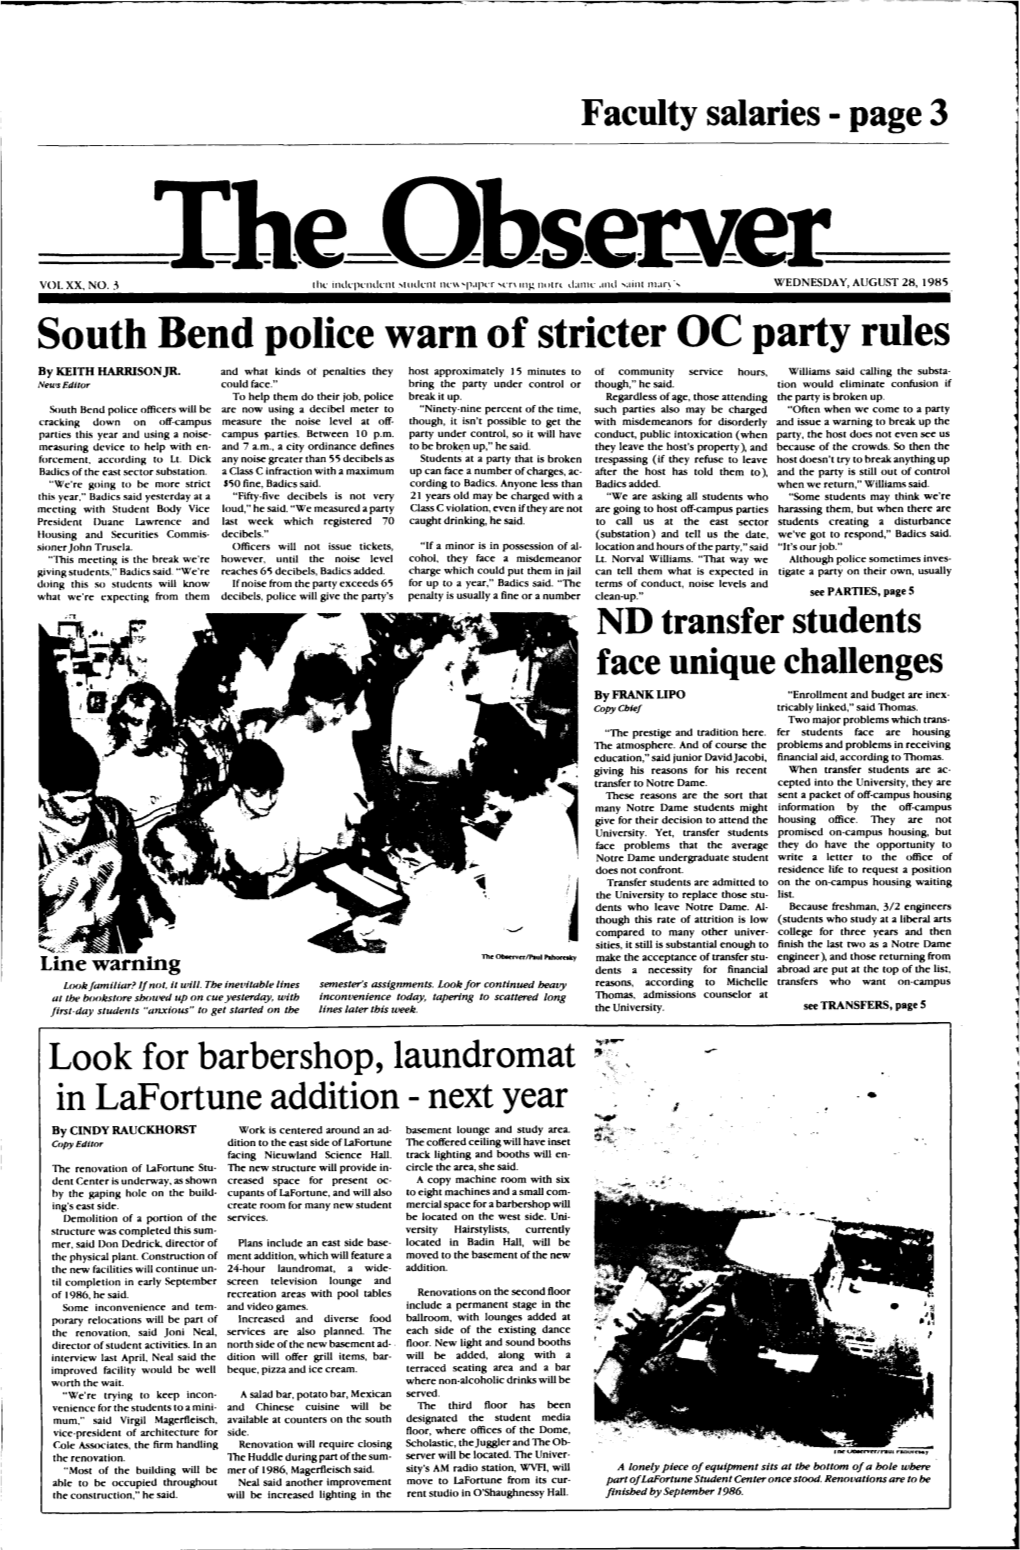 South Bend Police Warn of Stricter OC Party Rules by KEITH HARRISON JR